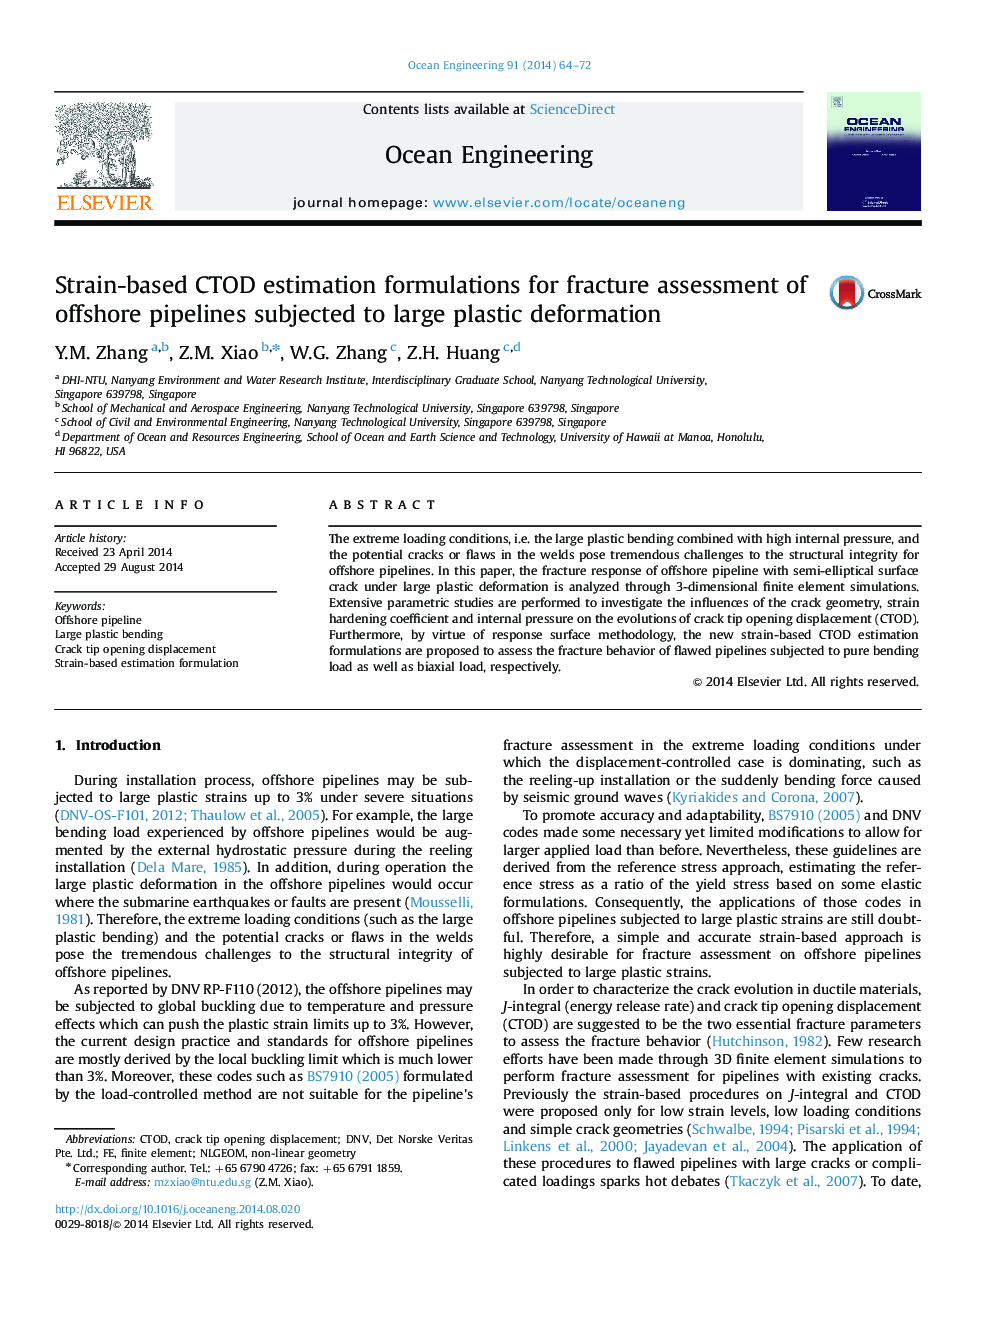 Strain-based CTOD estimation formulations for fracture assessment of offshore pipelines subjected to large plastic deformation